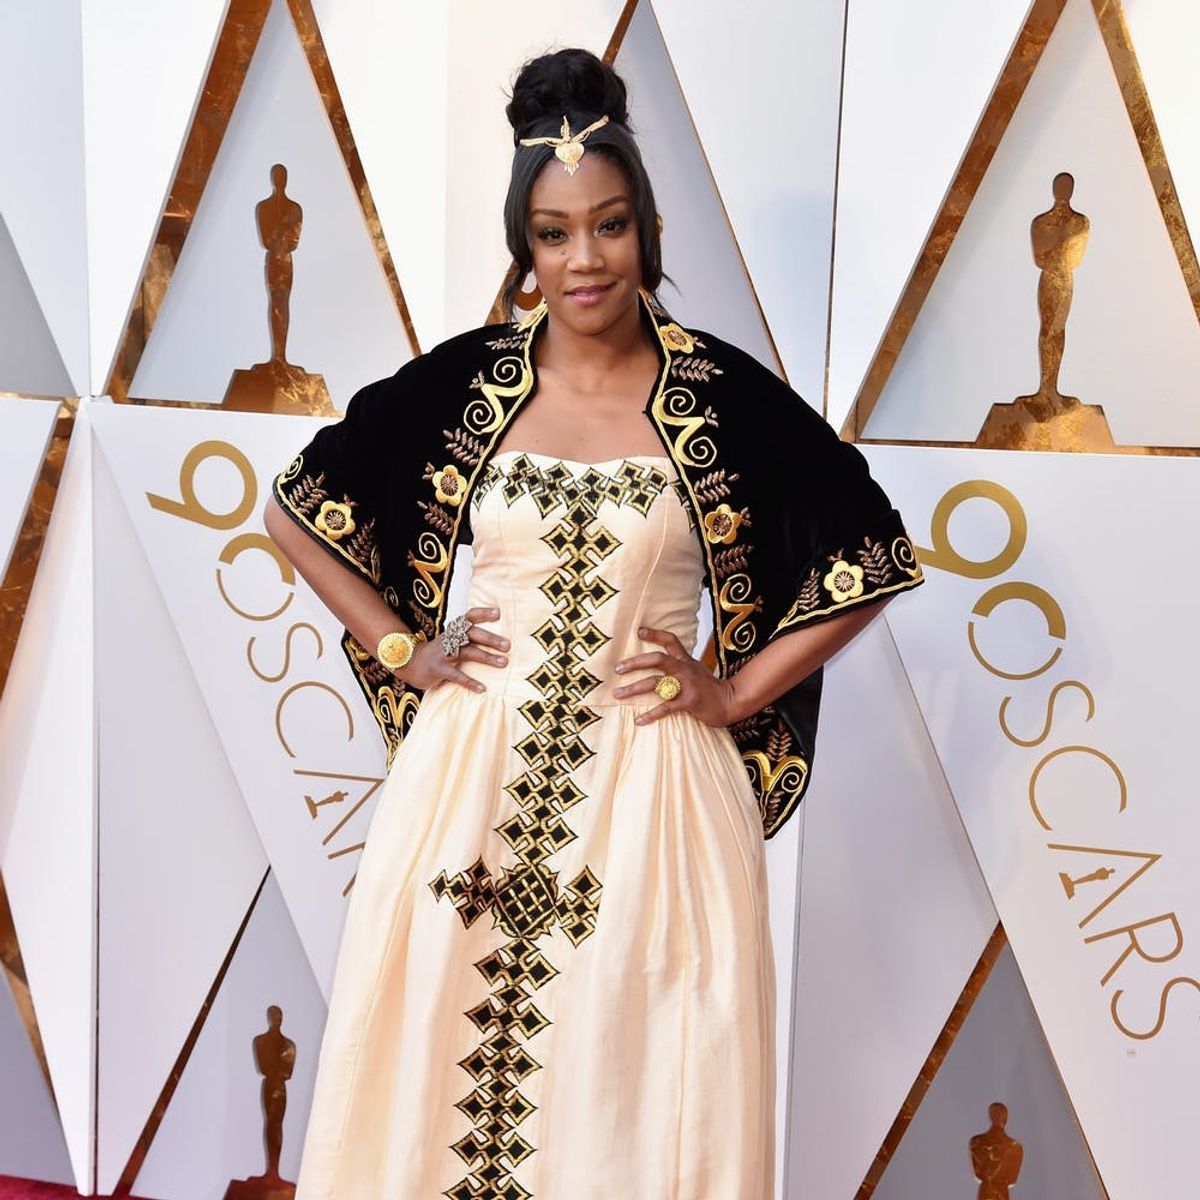 Oscar 2018: The Story Behind Tiffany Haddish’s Red Carpet Dress Will Have You in Tears